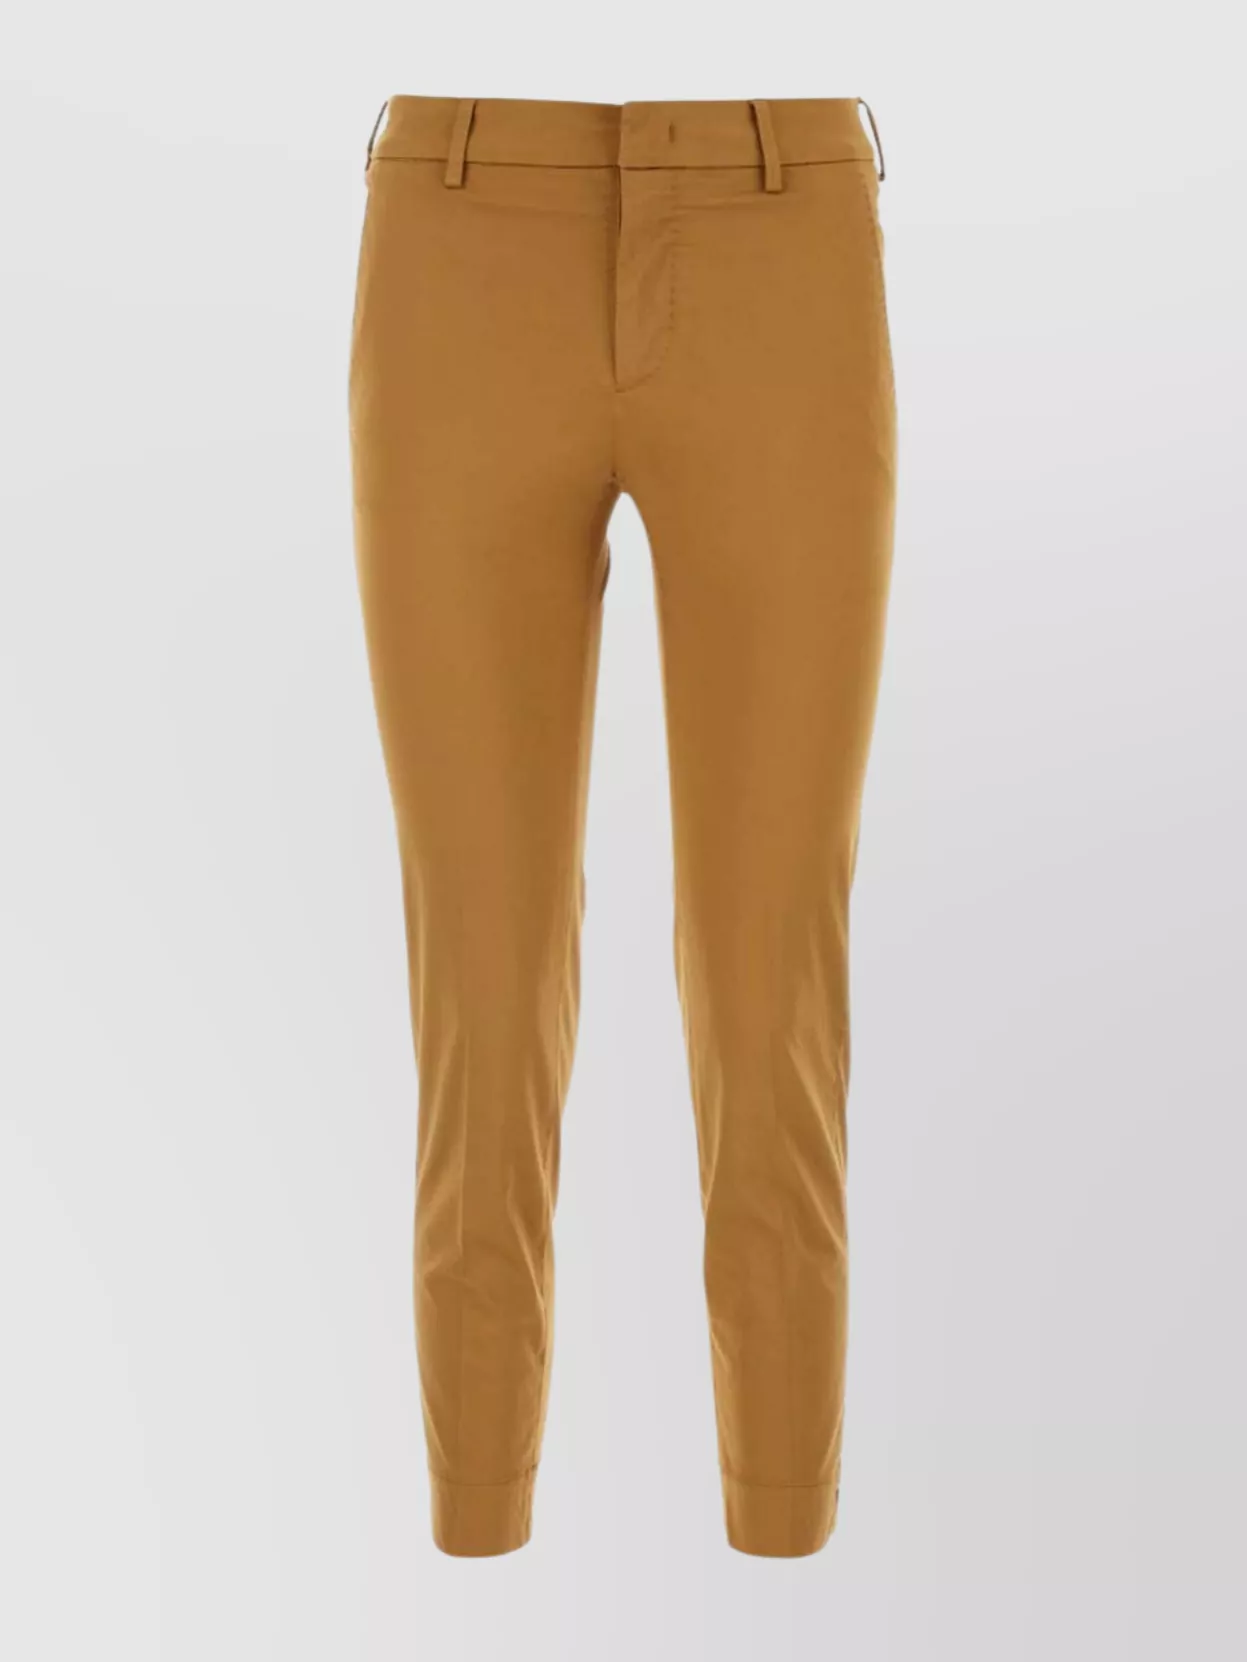 Shop Pt Torino Slim Fit Cropped Length Trousers With Belt Loops